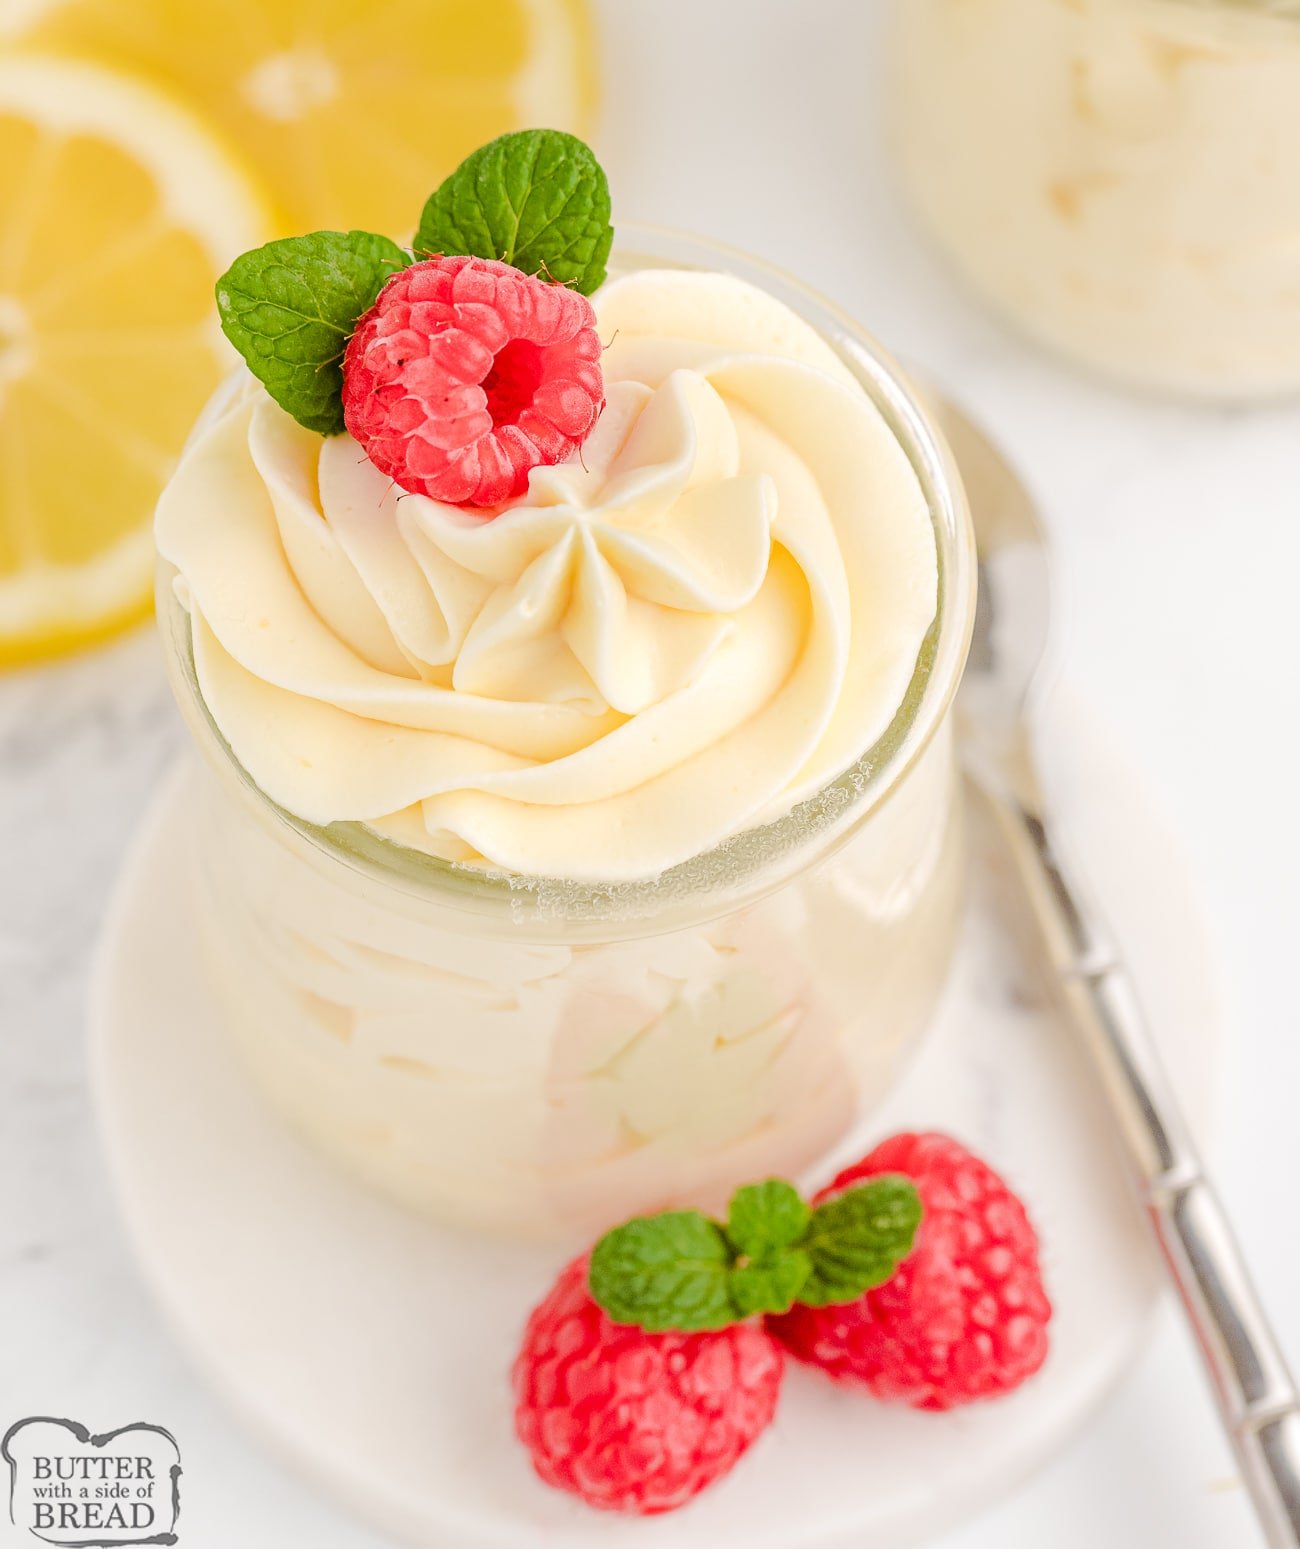 lemon mousse in a parfait glass with raspberries